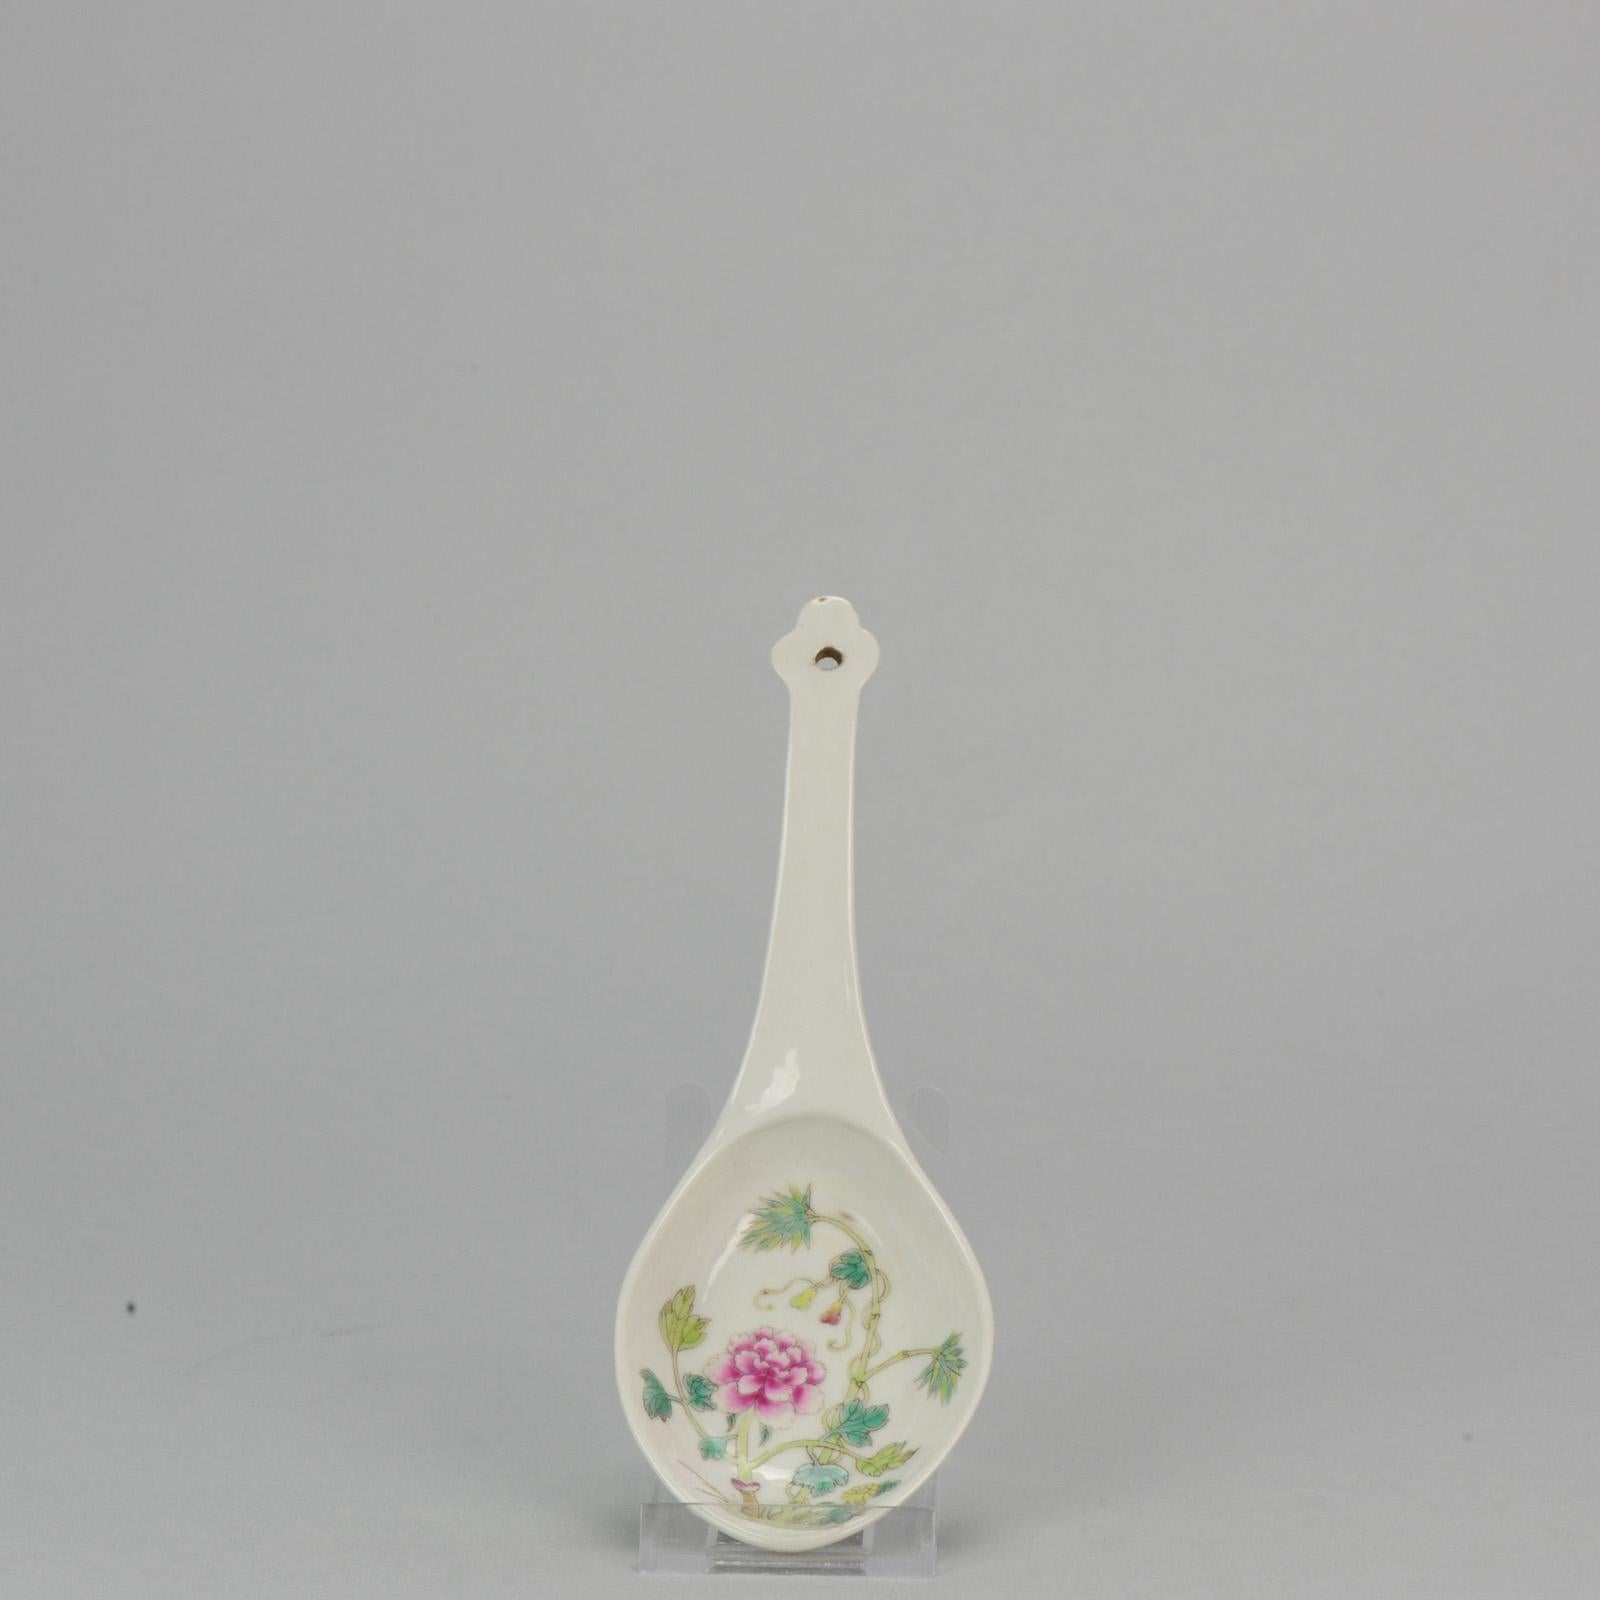 Very nice Spoon. LAte 19th or early 20th c. Fabulous quality.Very nice Spoons. MArked Qianlong & Guangxu

Additional information:
Material: Porcelain & Pottery
Type: Spoons
Color : Blue & White
Region of Origin: China
Period:19th century, 20th